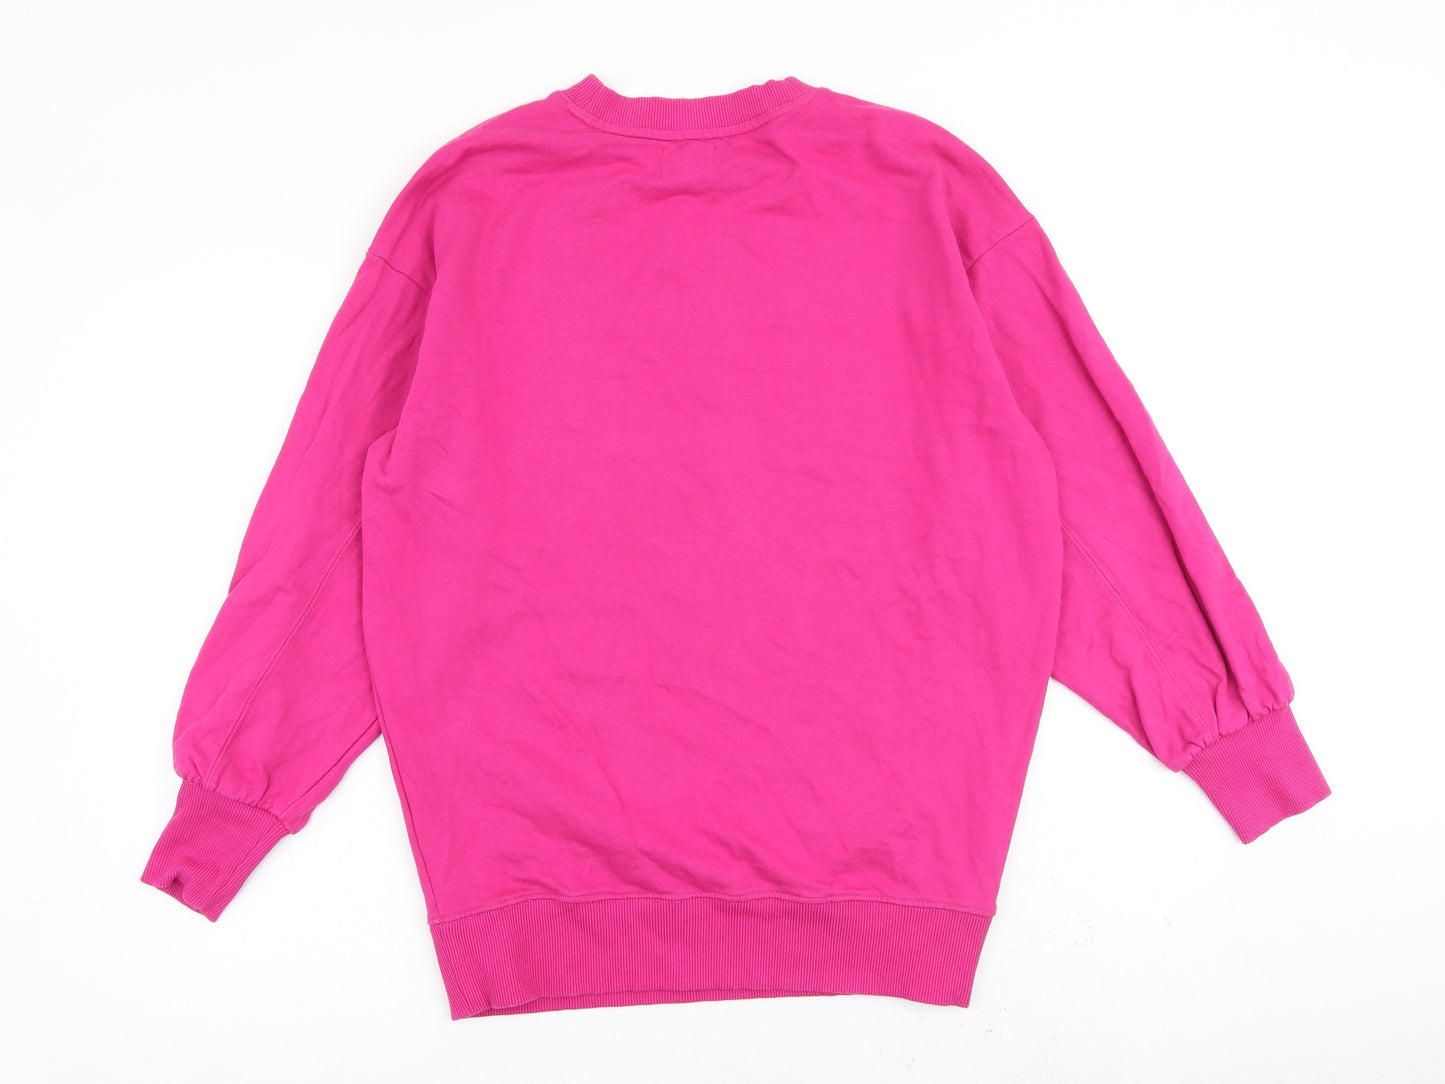 NEXT Womens Pink 100% Cotton Pullover Sweatshirt Size S Pullover - WOW